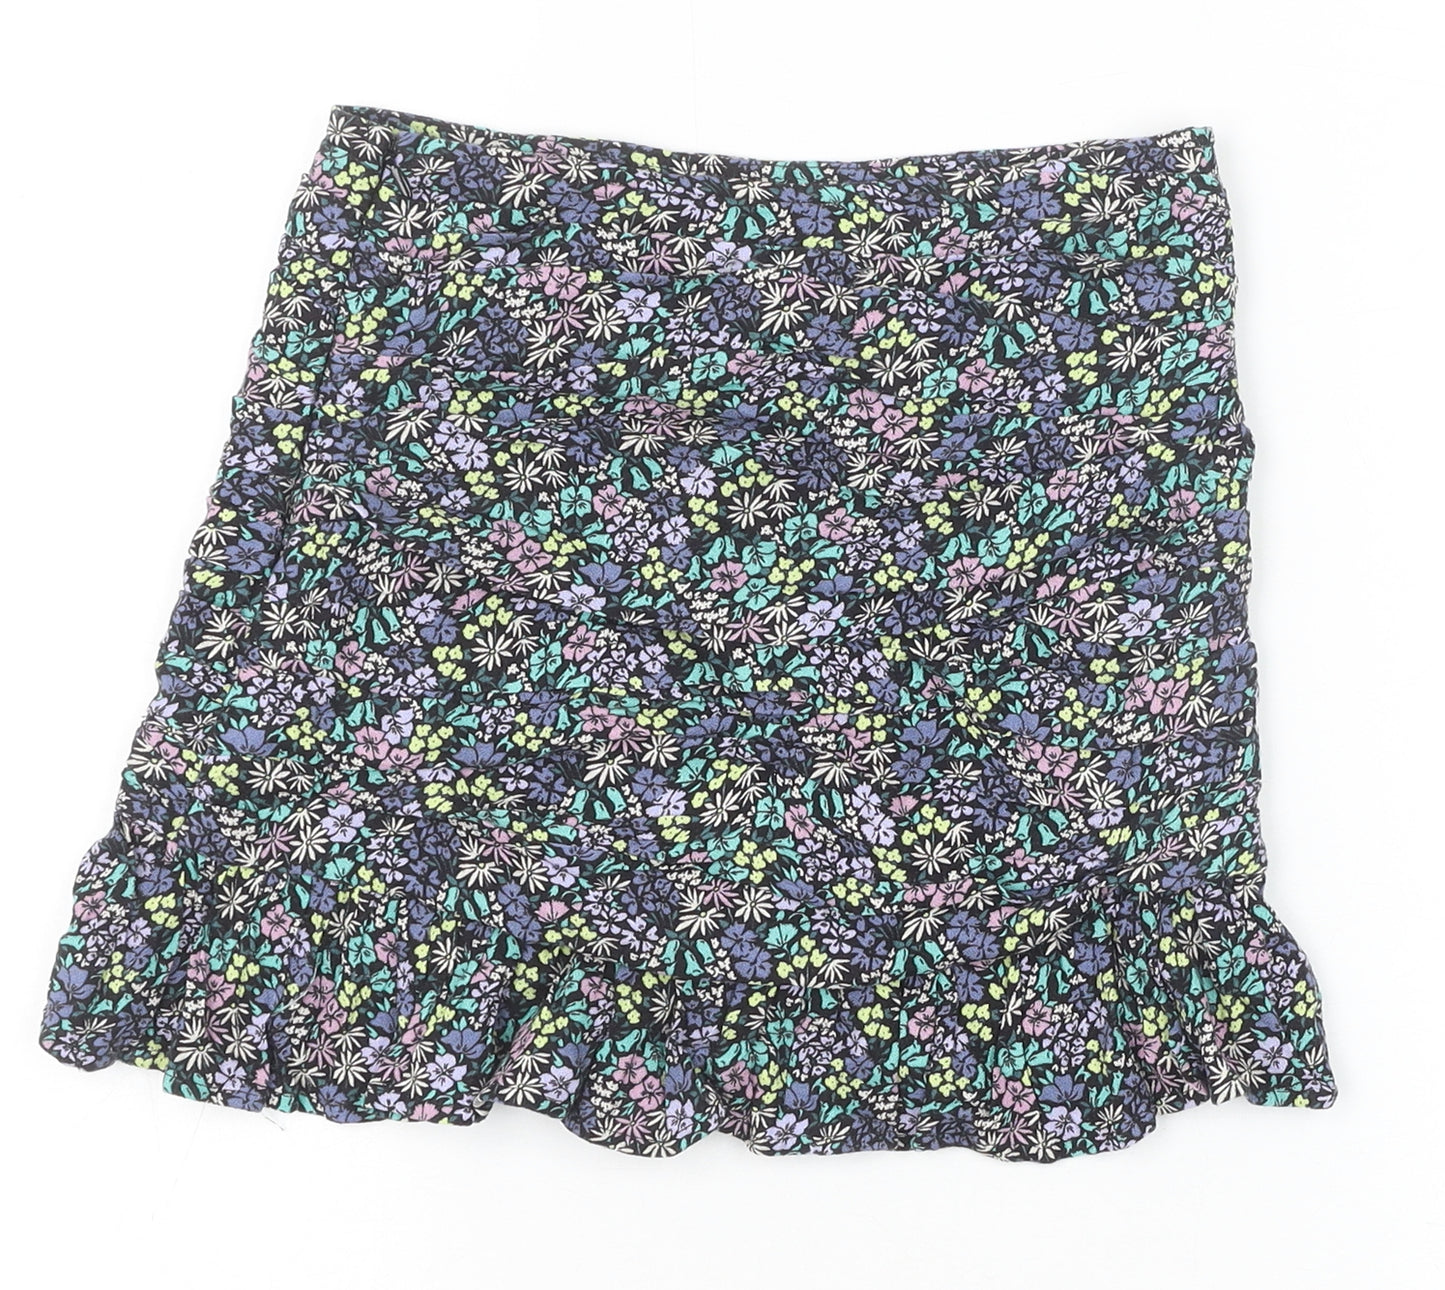 Marks and Spencer Girls Multicoloured Floral Viscose A-Line Skirt Size 8-9 Years Regular Zip